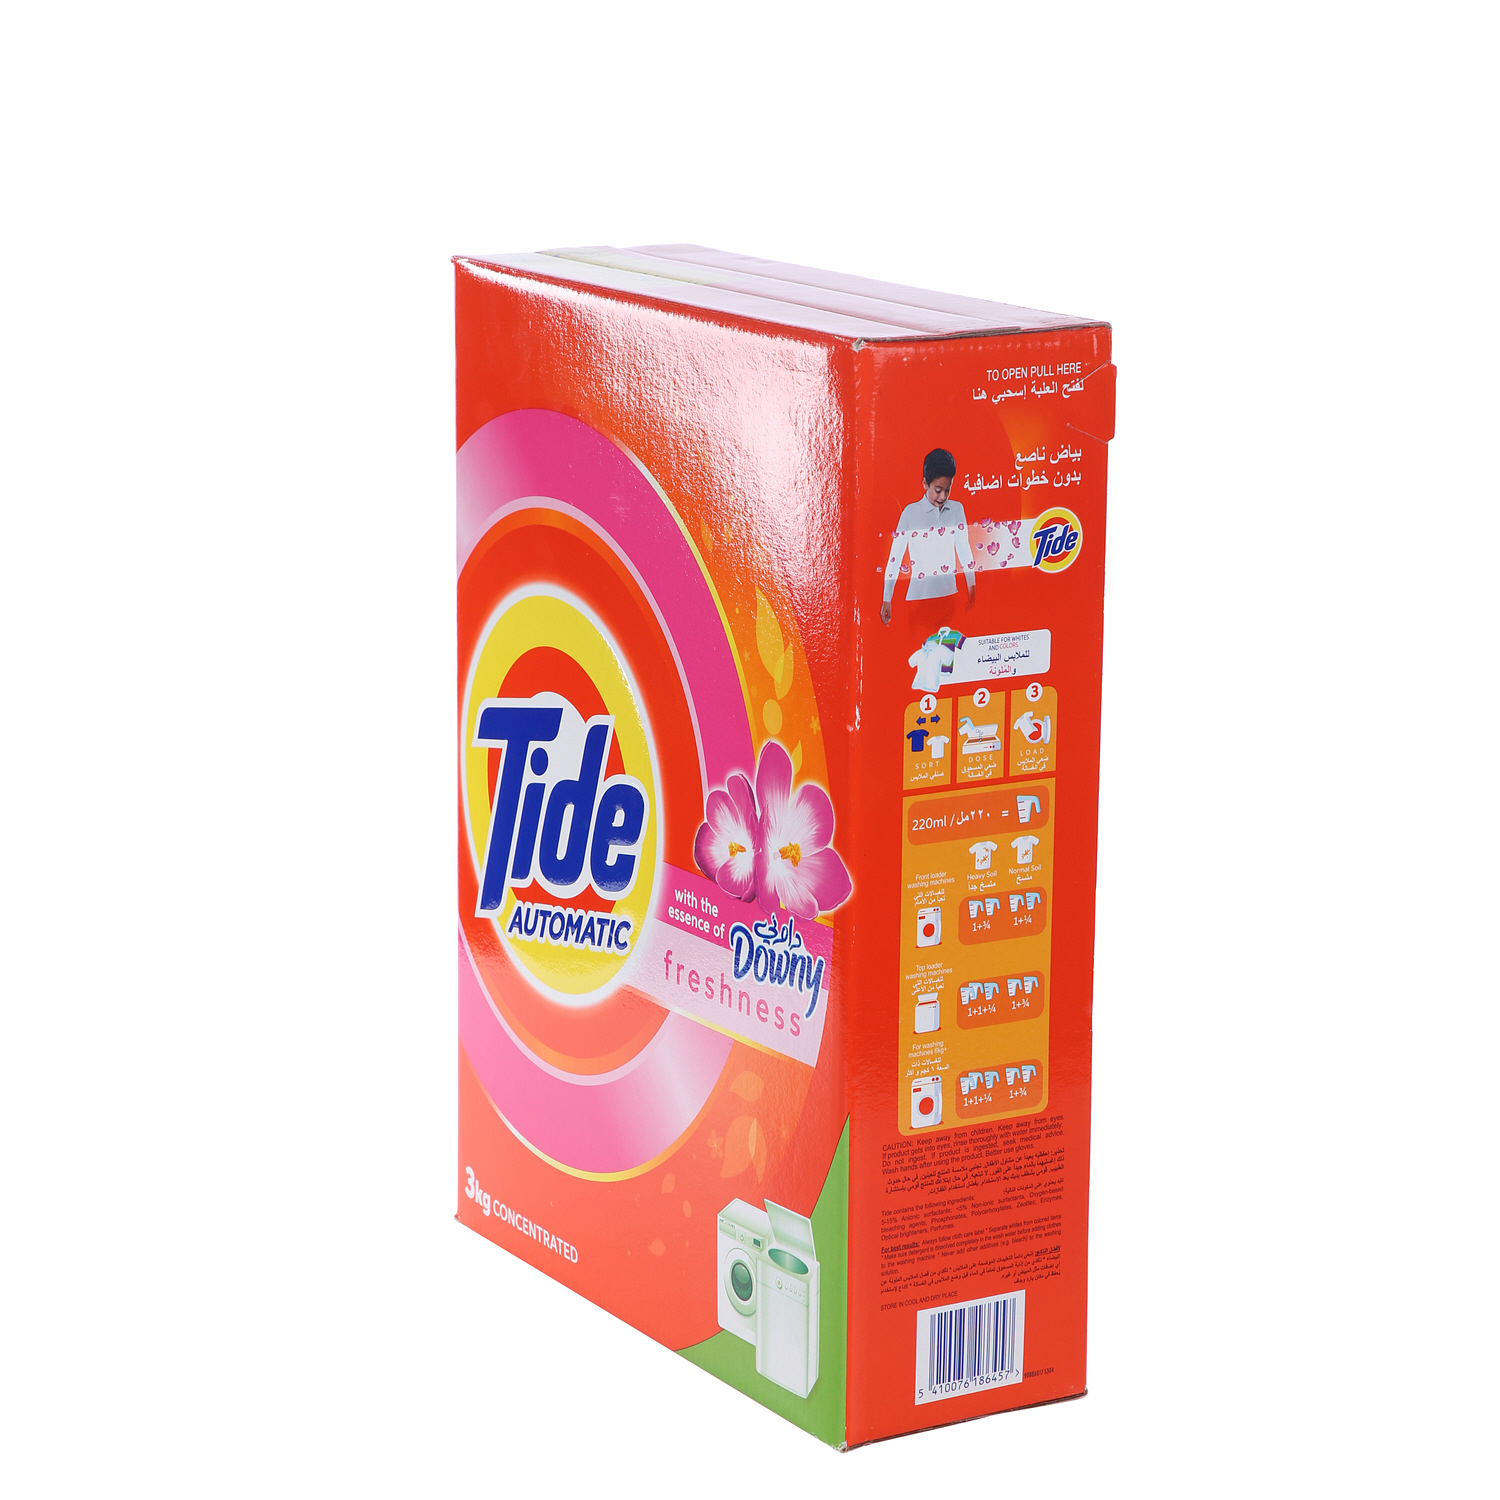 Tide Automatic Detergent with Downy Freshness 3 Kg